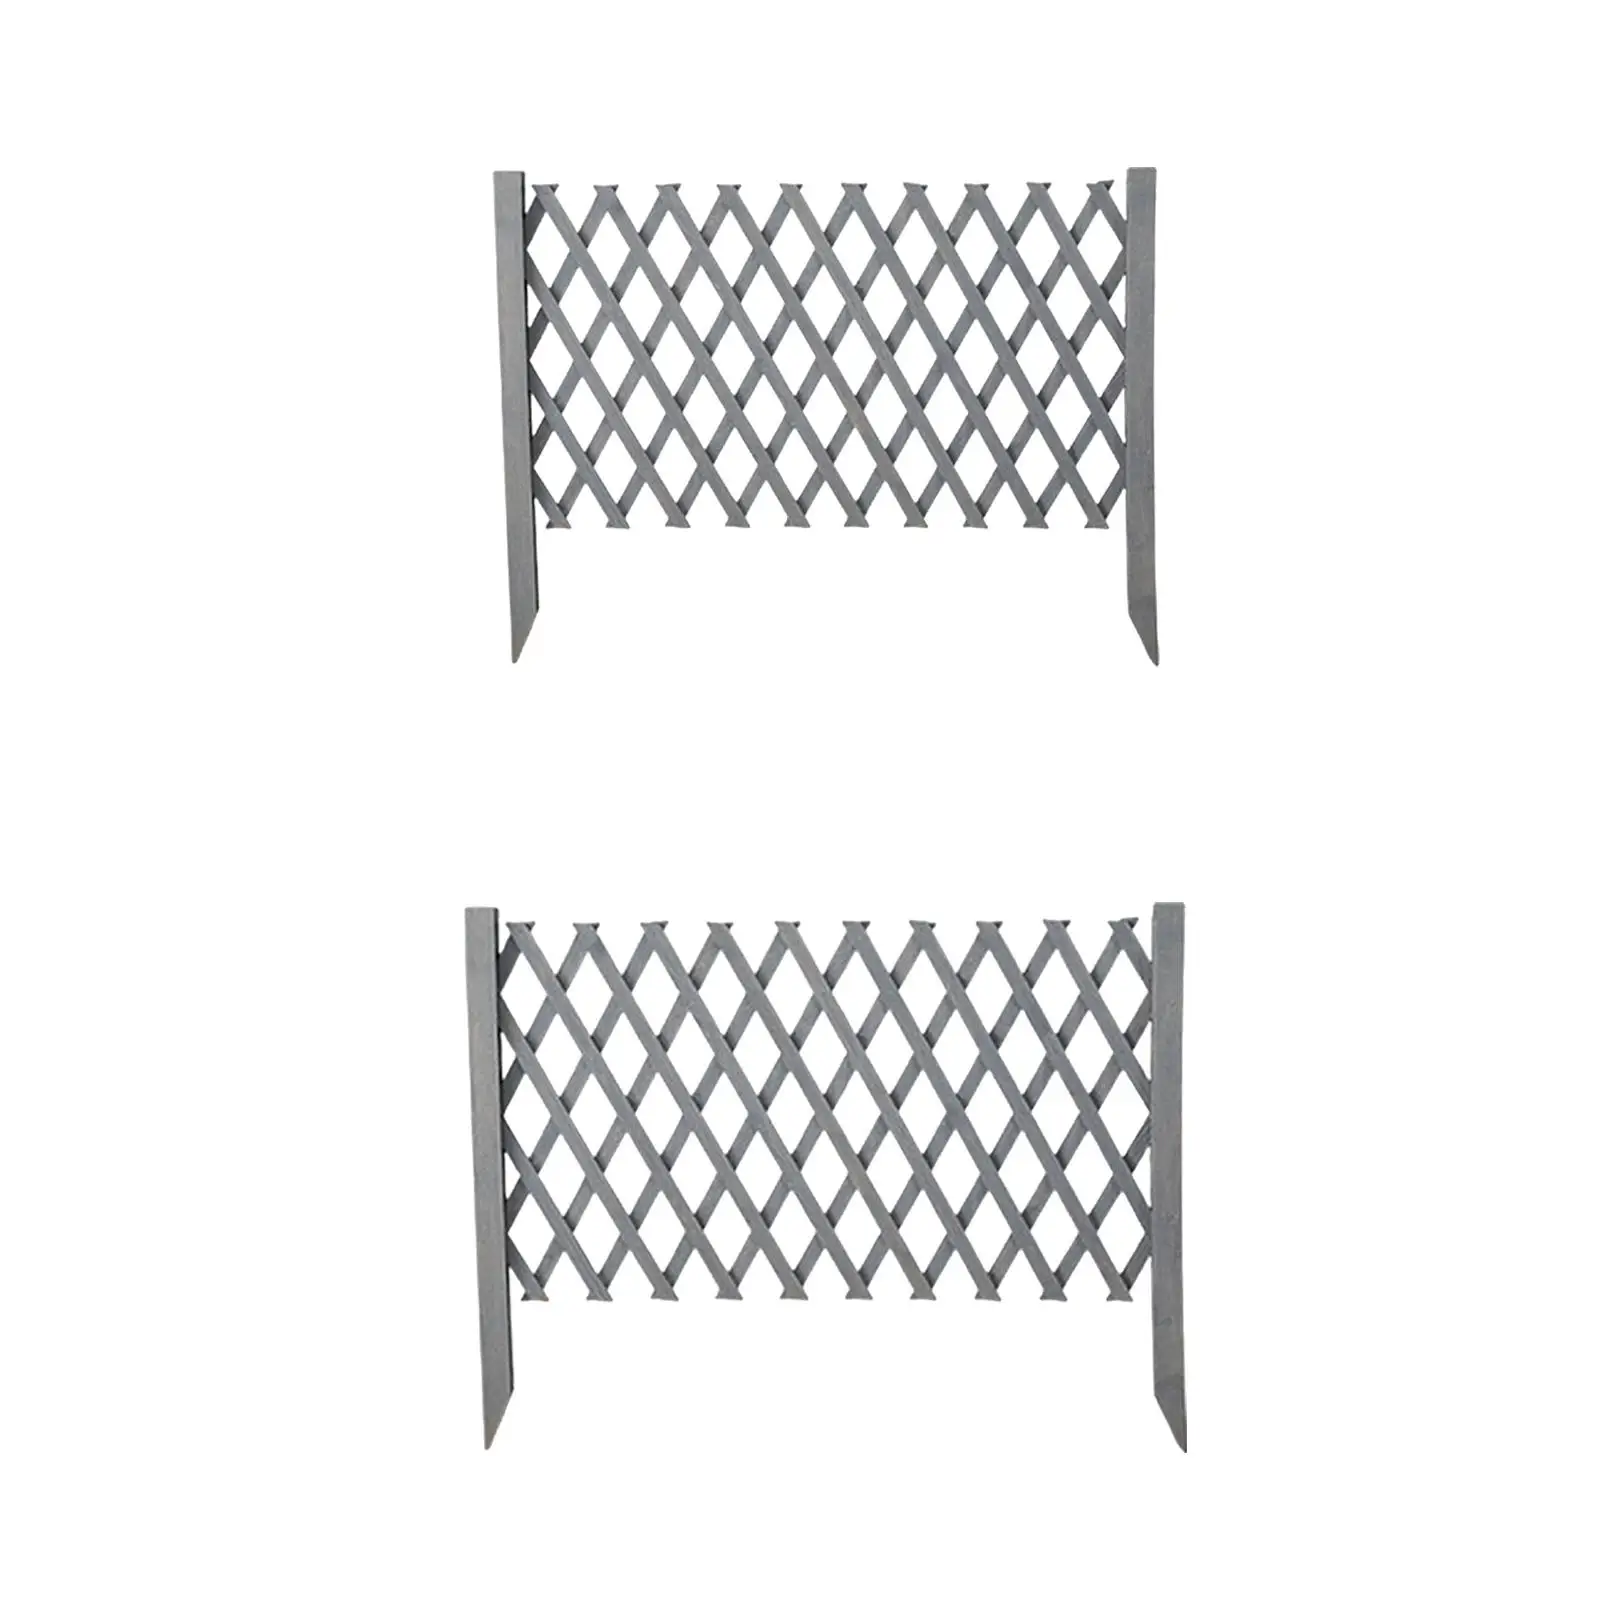 Garden Trellis Fence Wood Fence Partition Expandable Wooden Fence for Restaurant Yard